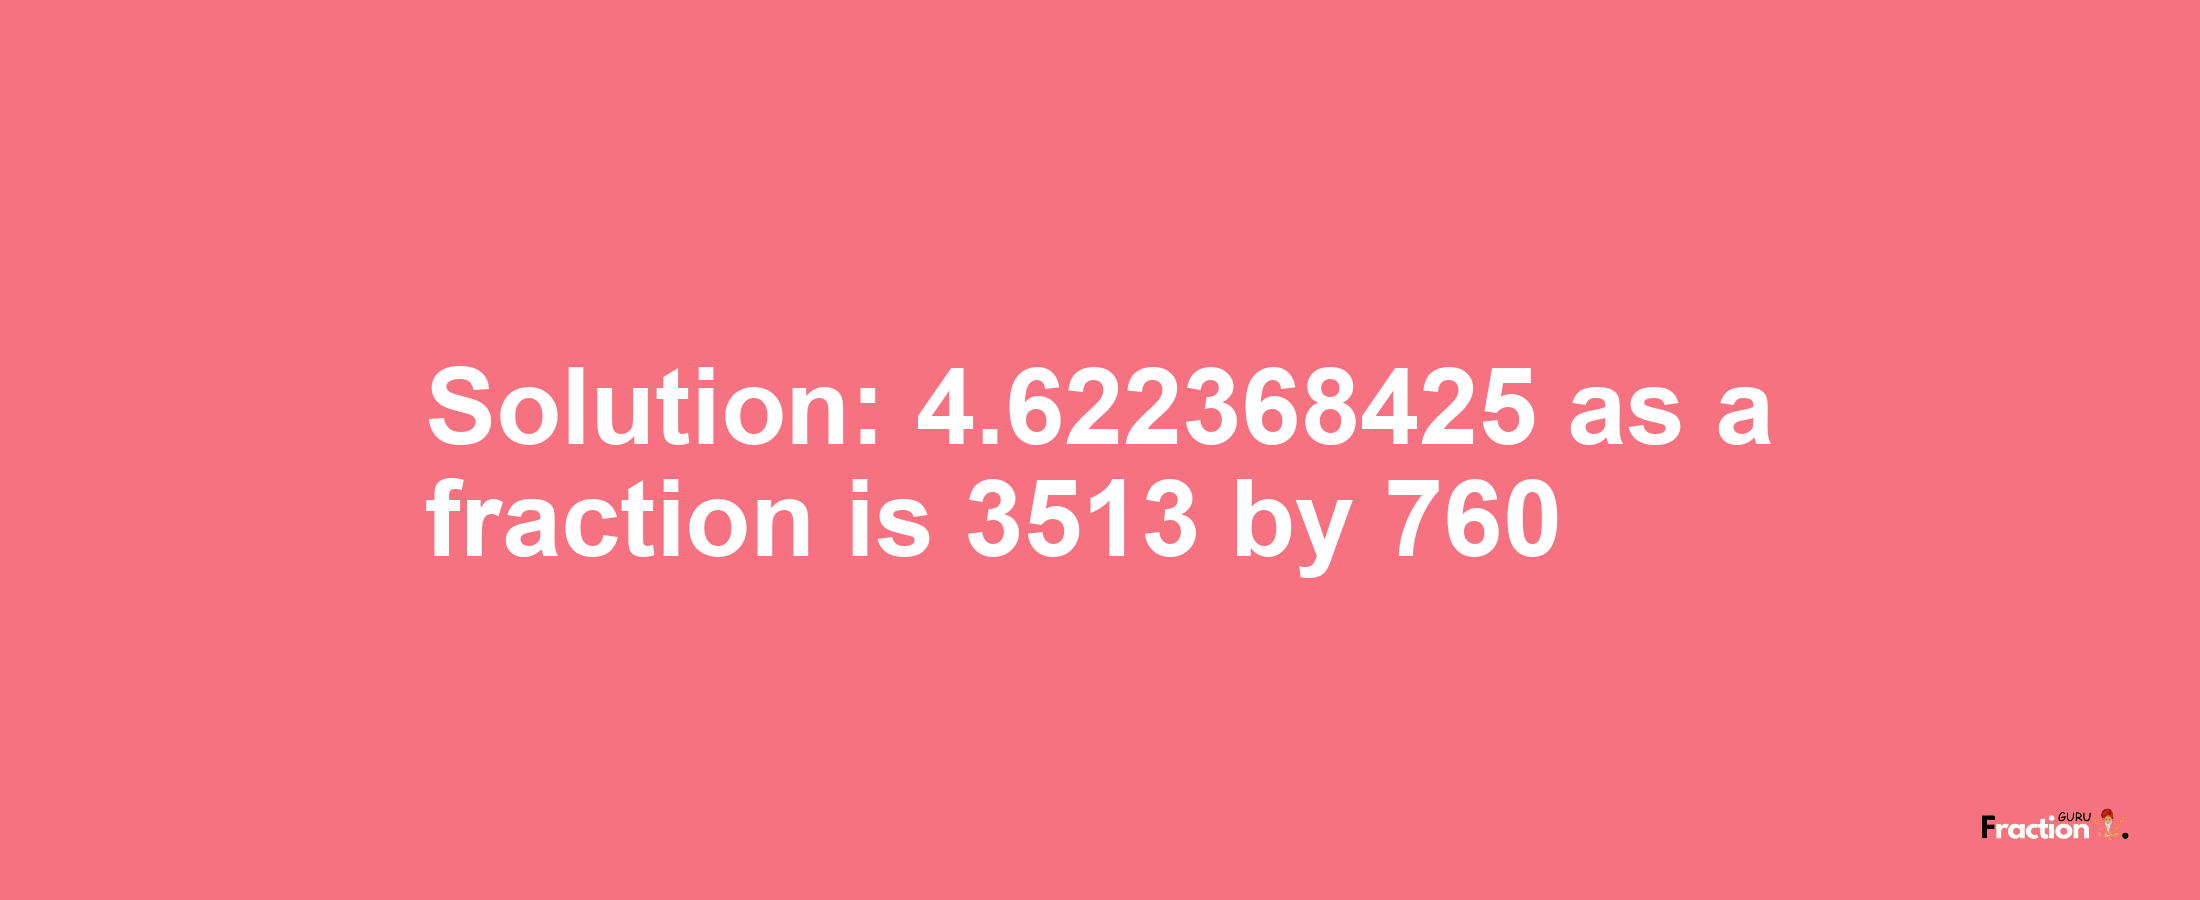 Solution:4.622368425 as a fraction is 3513/760